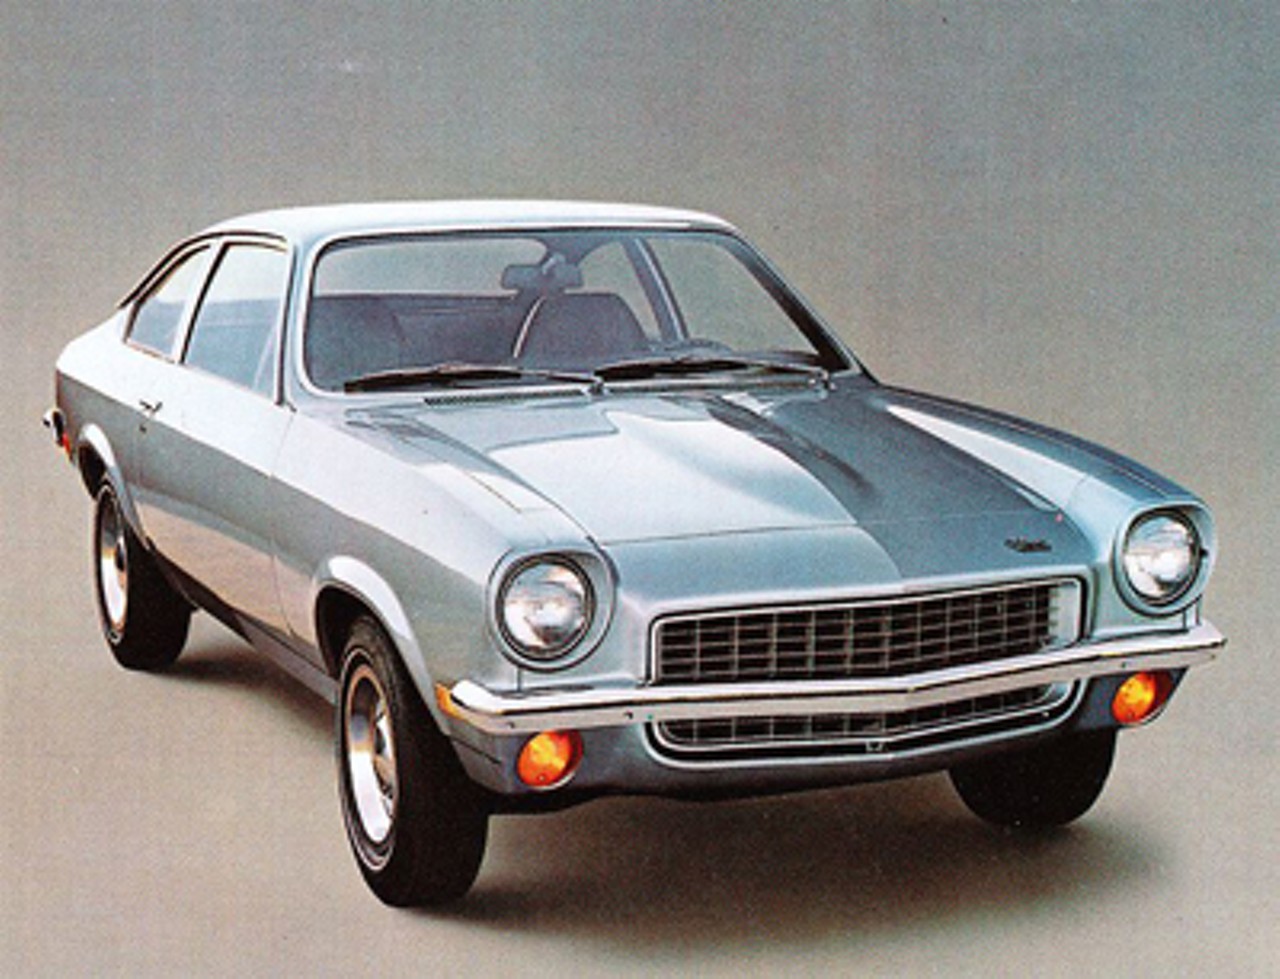 Chevrolet Vega
A subcompact rolled out during the fuel crisis of the '70s, the Chevrolet Vega rivaled the puny Ford Pinto and AMC Gremlin. It was a big seller back then, even though it's looked at as a relic today. Read Paul Knight's Prius feature: "Wild Rides."